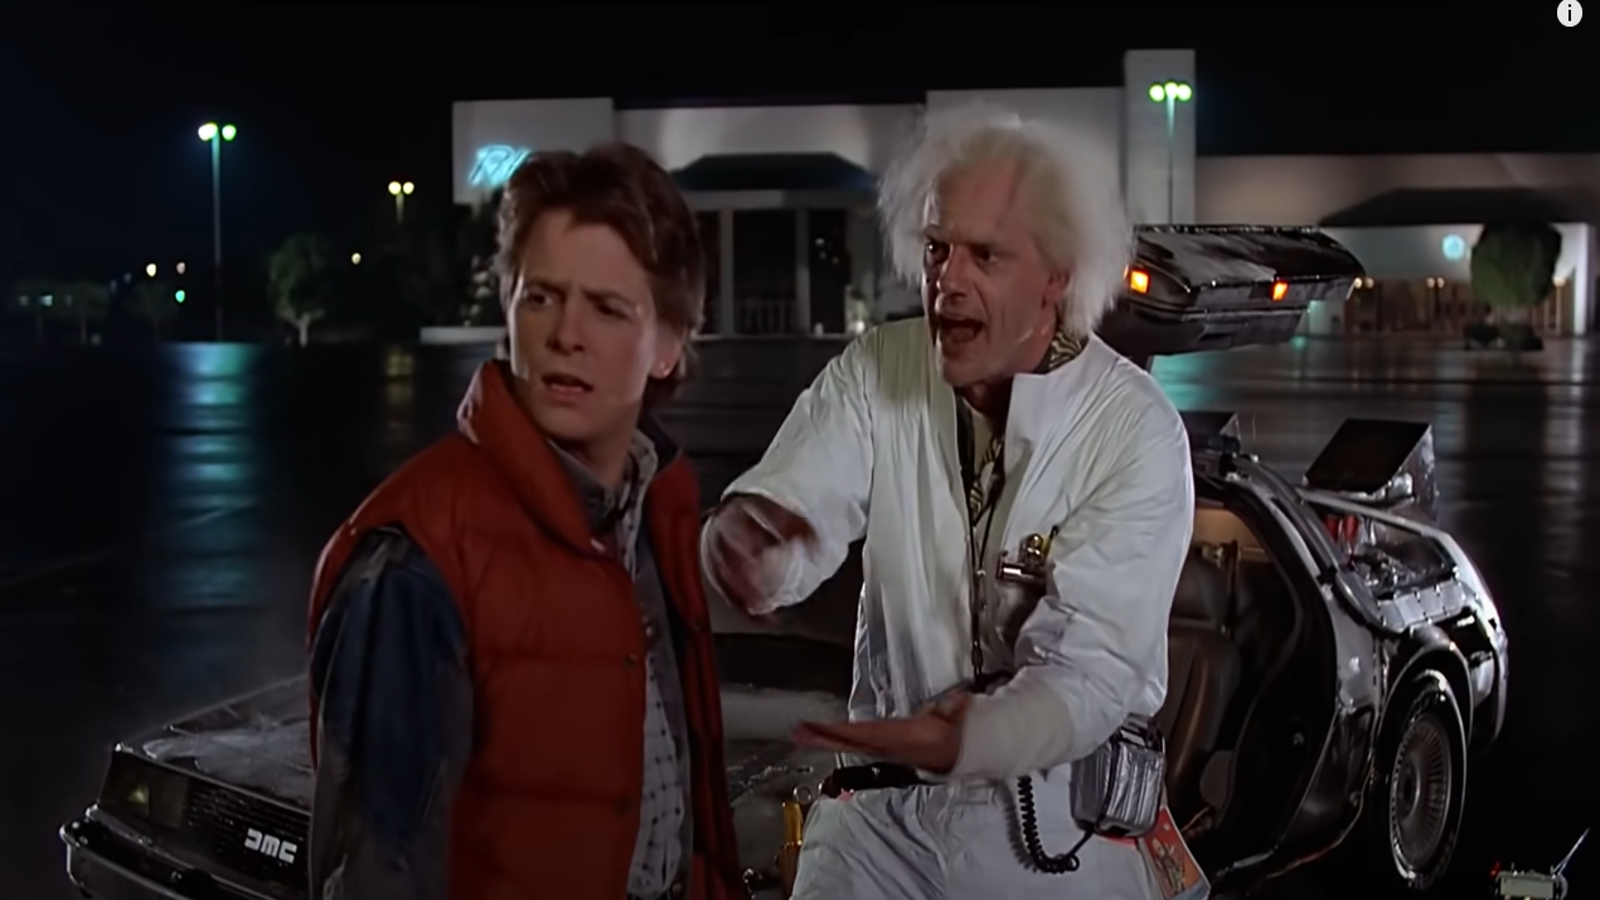 Michael J. Fox and Christopher Lloyd Debut BACK TO THE FUTURE